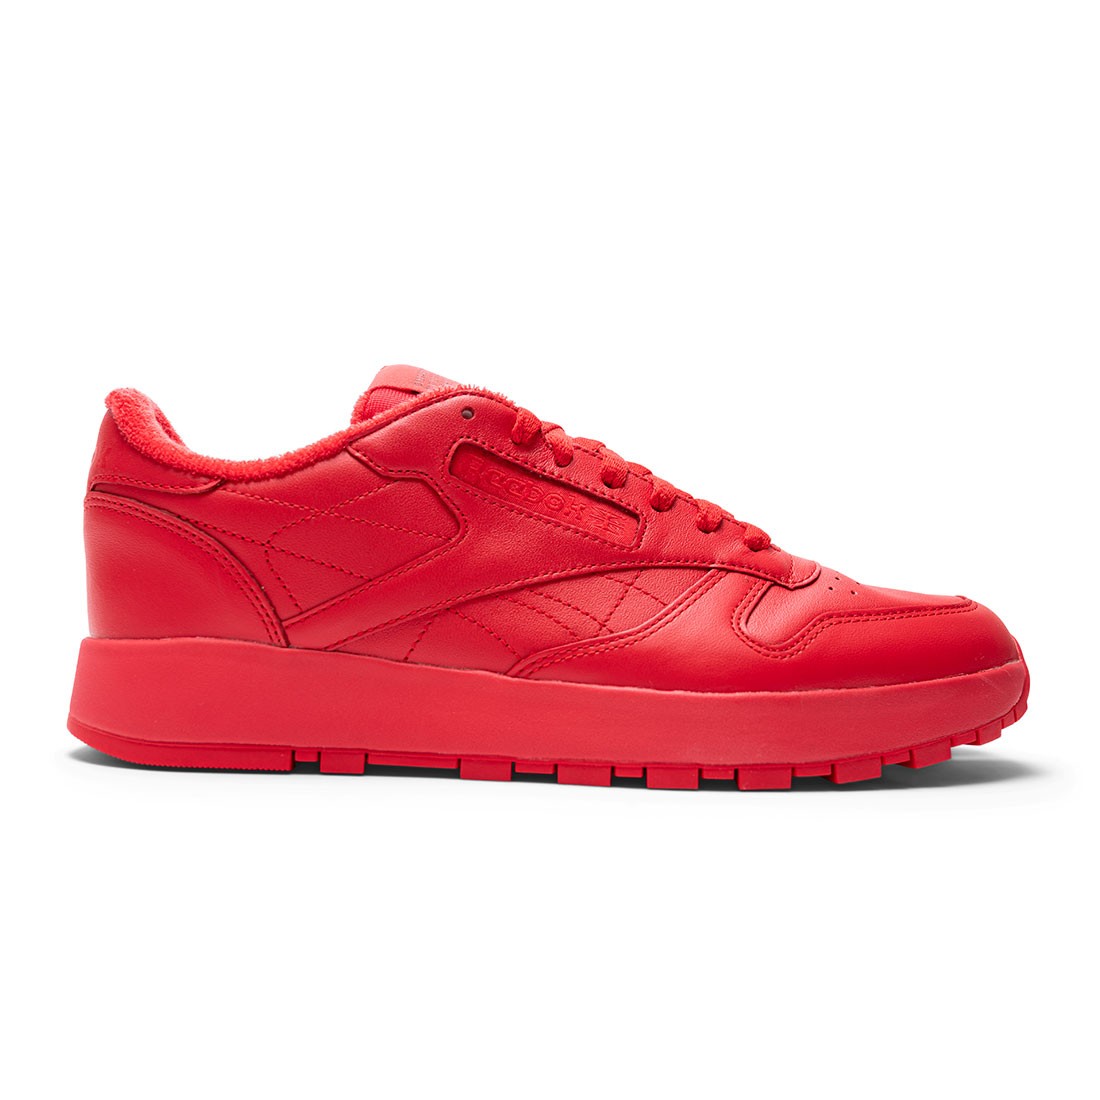 Reebok x Maison Margiela Men Project 0 Classic Leather red vector